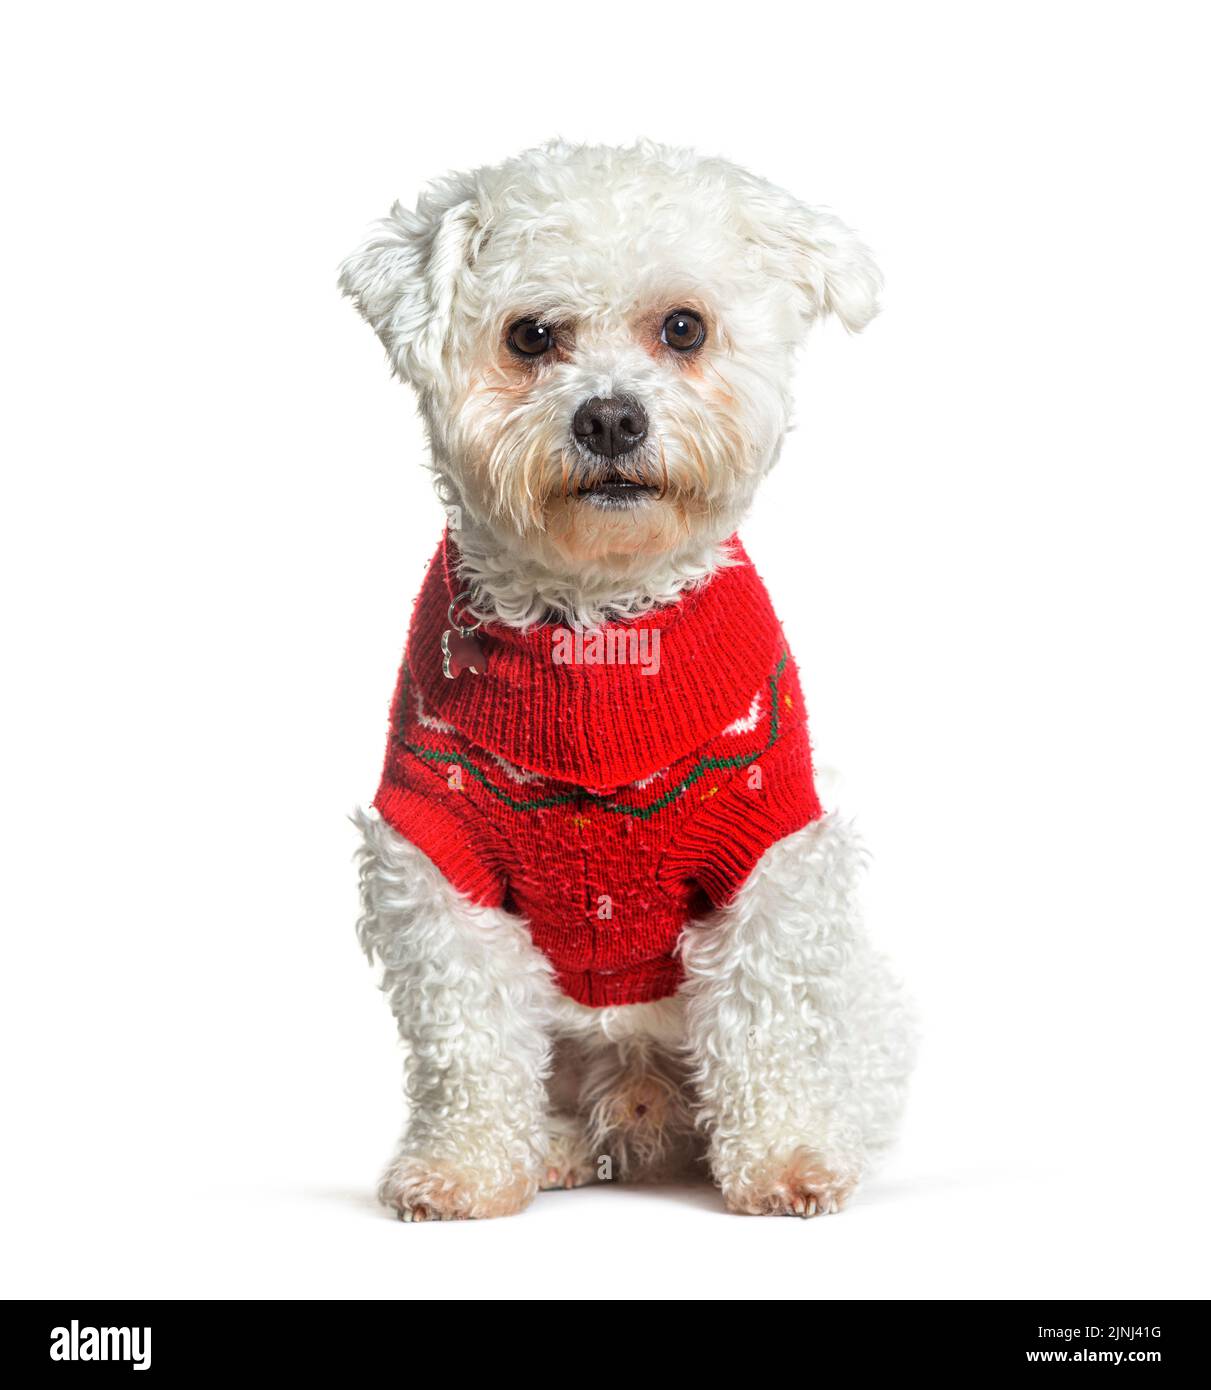 Bichon Frise sitting and looking at the camera wearing a red woollen coat, isolated on white Stock Photo